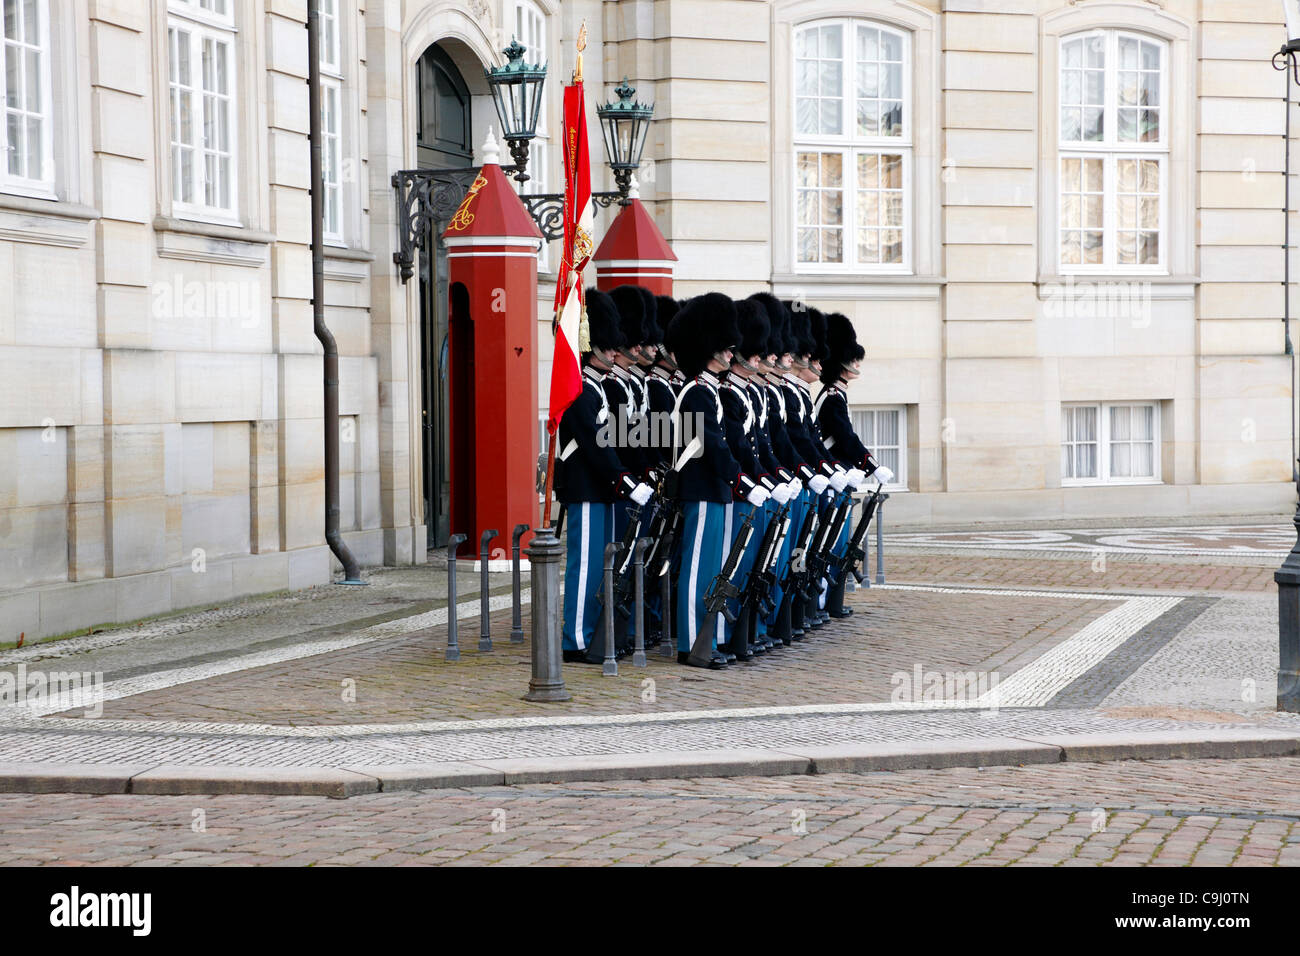 Jan.Tuesday 10, 2012 - Amalienborg Palace, Copenhagen, Denmark - The Royal Life Guards with an extended musical performance at the change of guards to begin the celebrations of Queen Margrethe II of Denmark 40th Jubilee this week Stock Photo